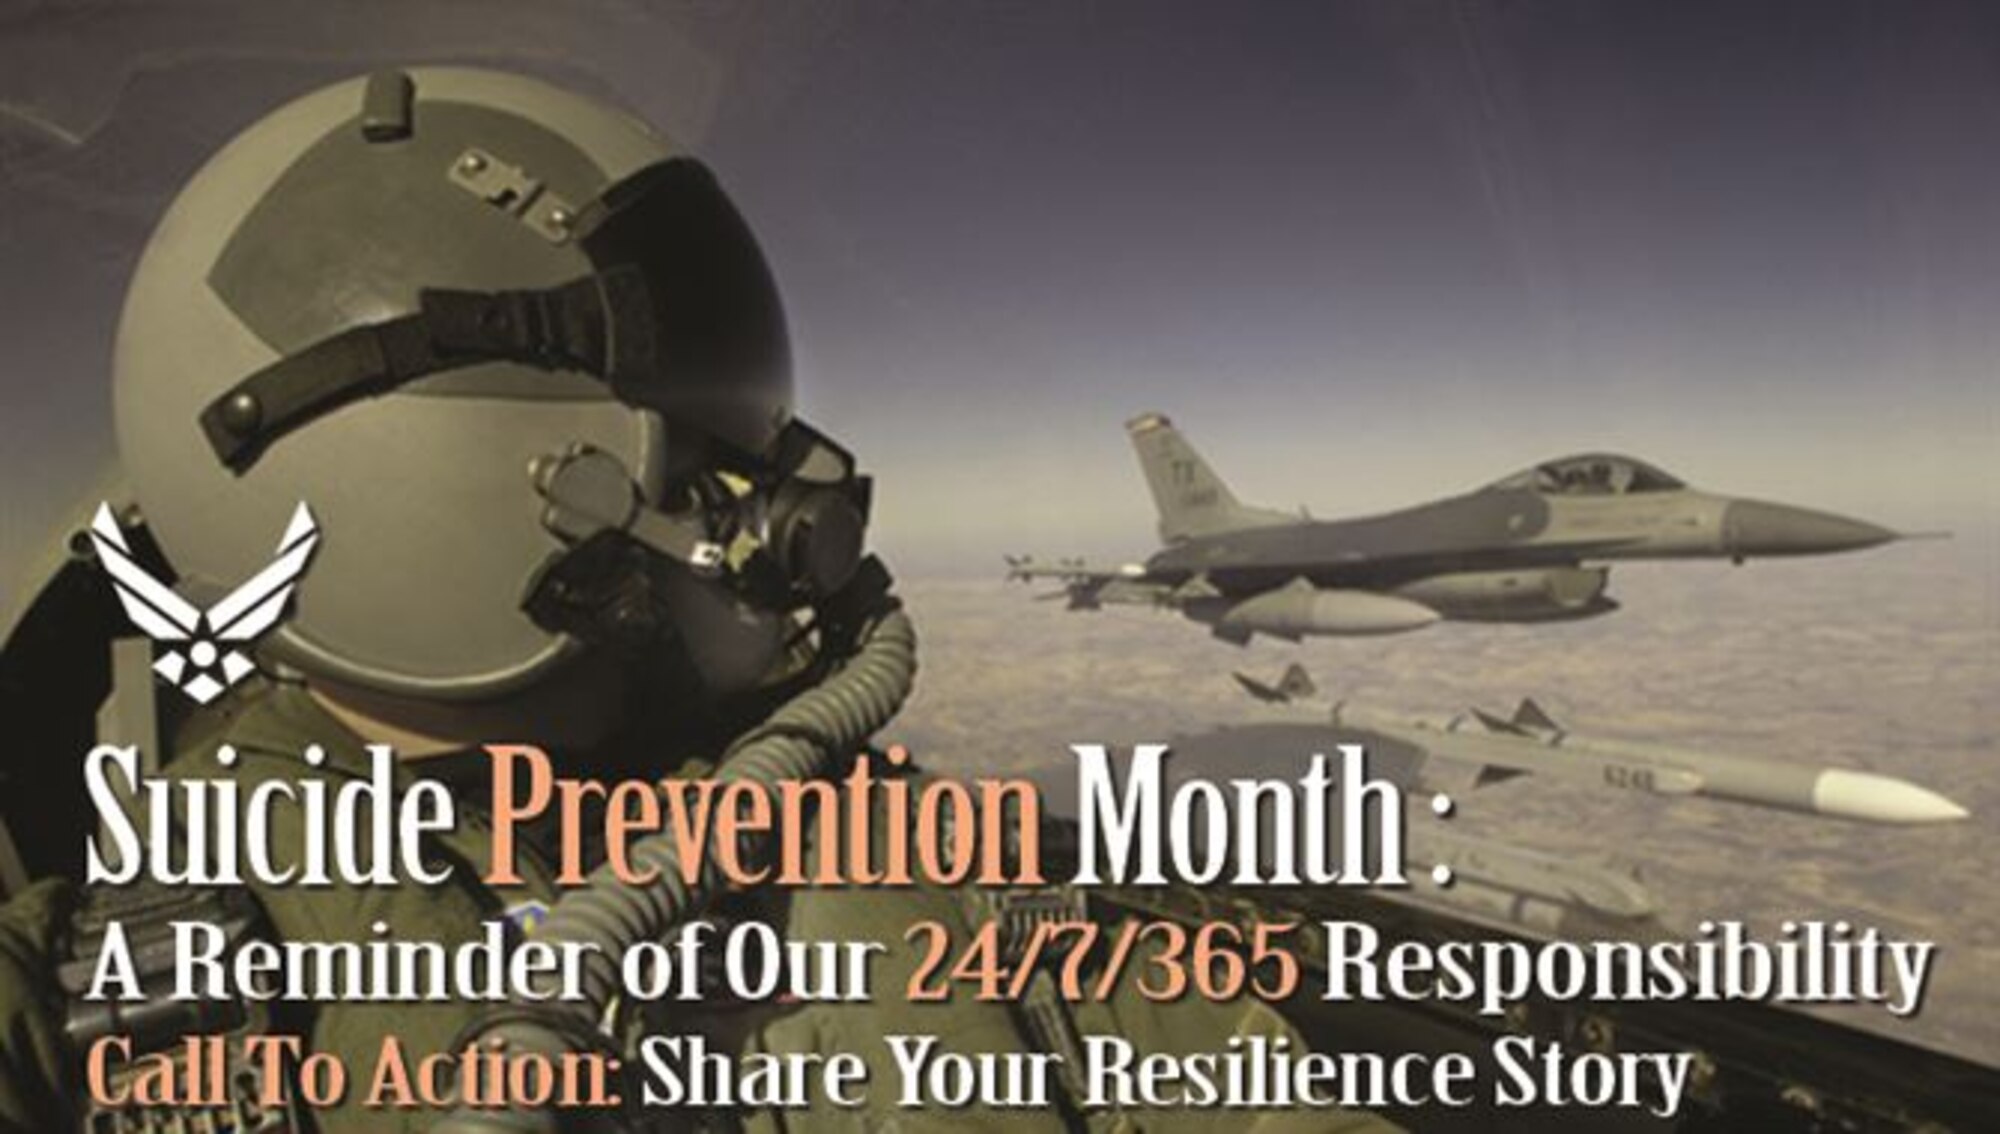 Suicide Prevention Month: A reminder of our 24/7/365 responsibility to ourselves and each other. (Air Force Graphic / Steve Thompson)